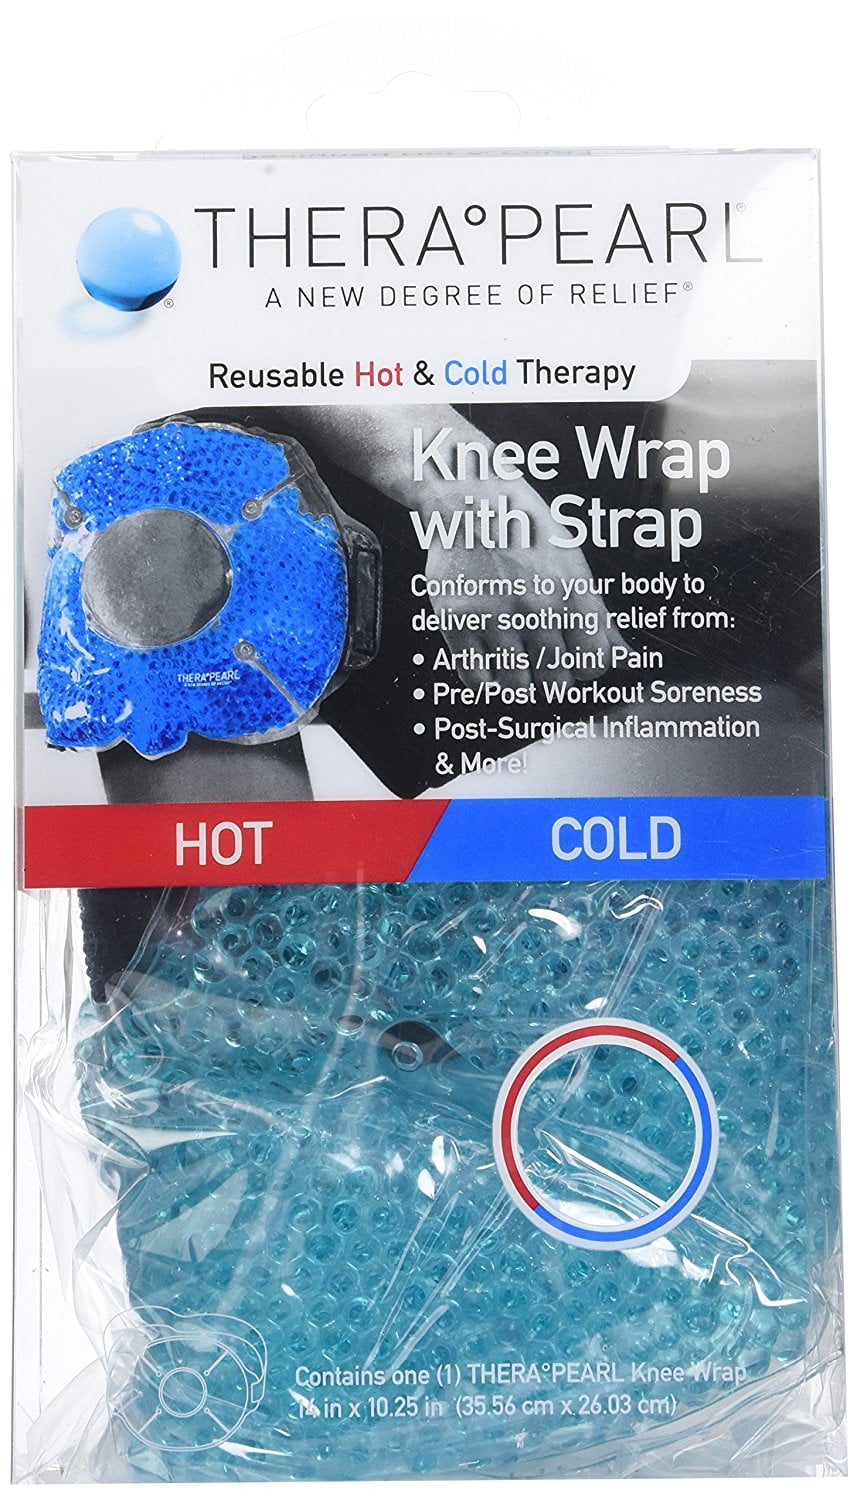 TheraPAQ Ice Packs for Injuries Reusable Version - Adjustable Large 14 x 11 inch Hot and Cold Gel Pack wAdjustable Strap for Hip Shoulder Knee and Ba